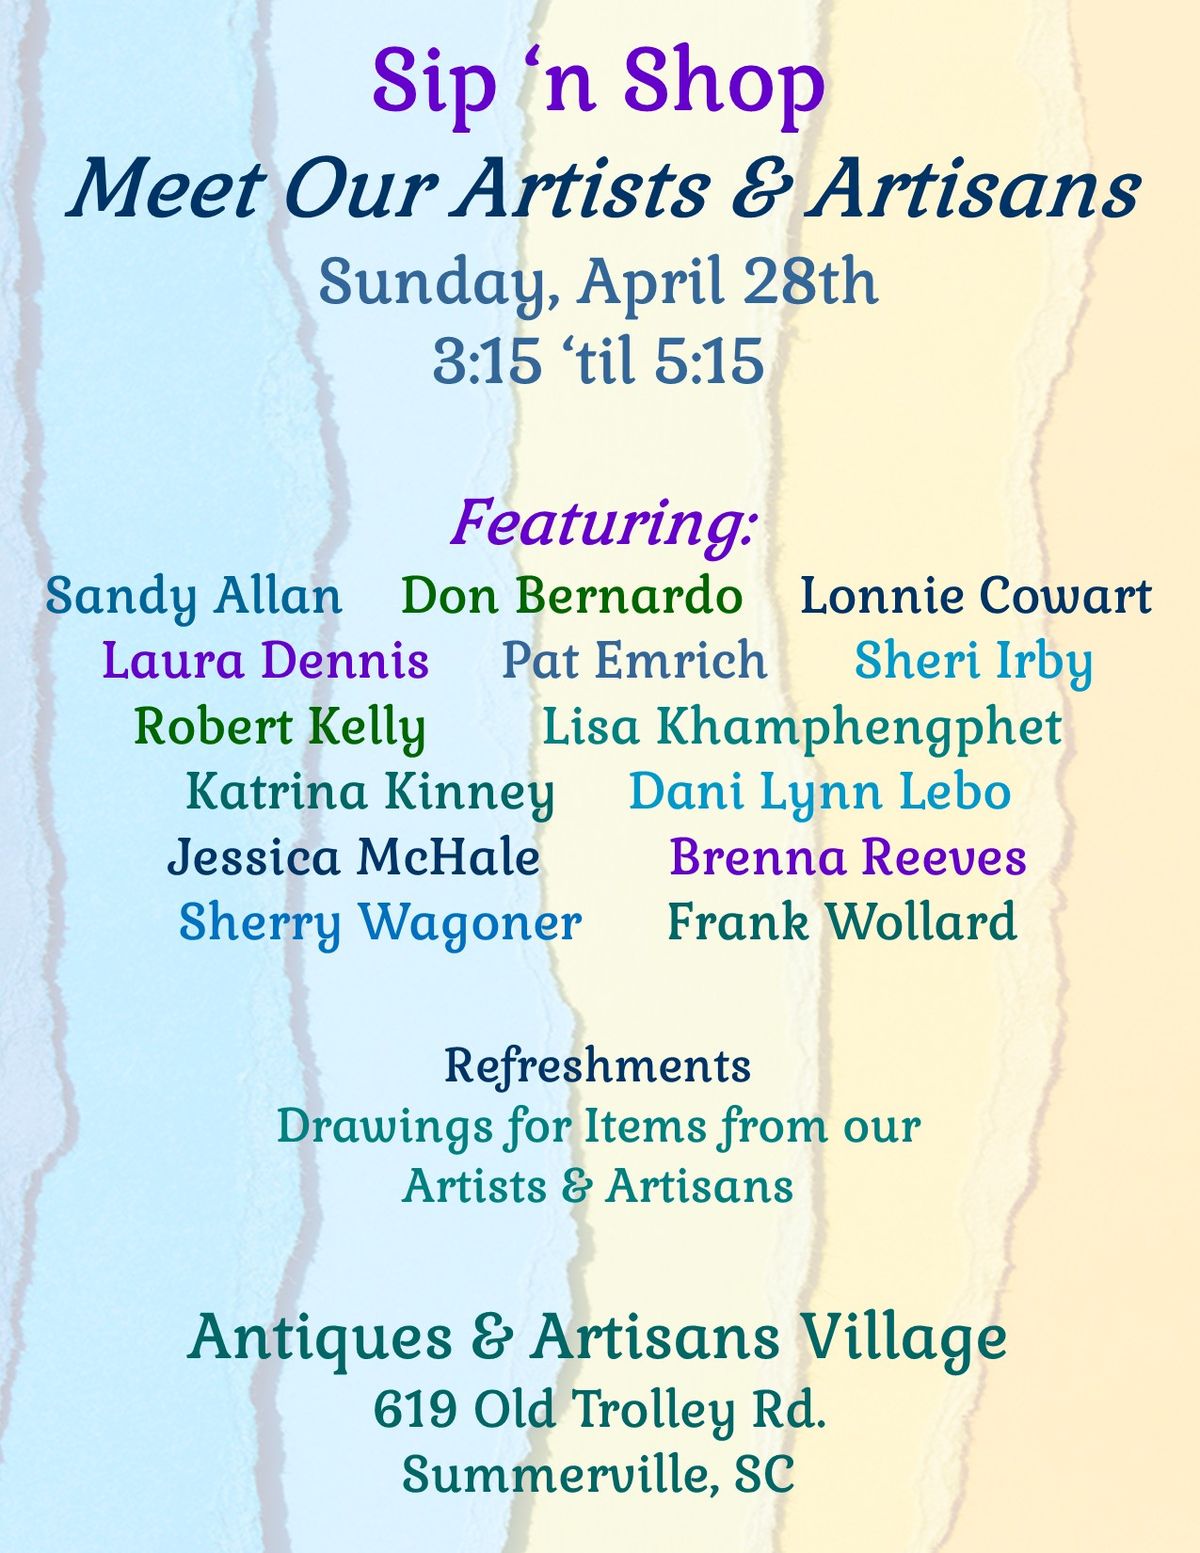 Meet Our Artists & Artisans and Sip 'n Shop